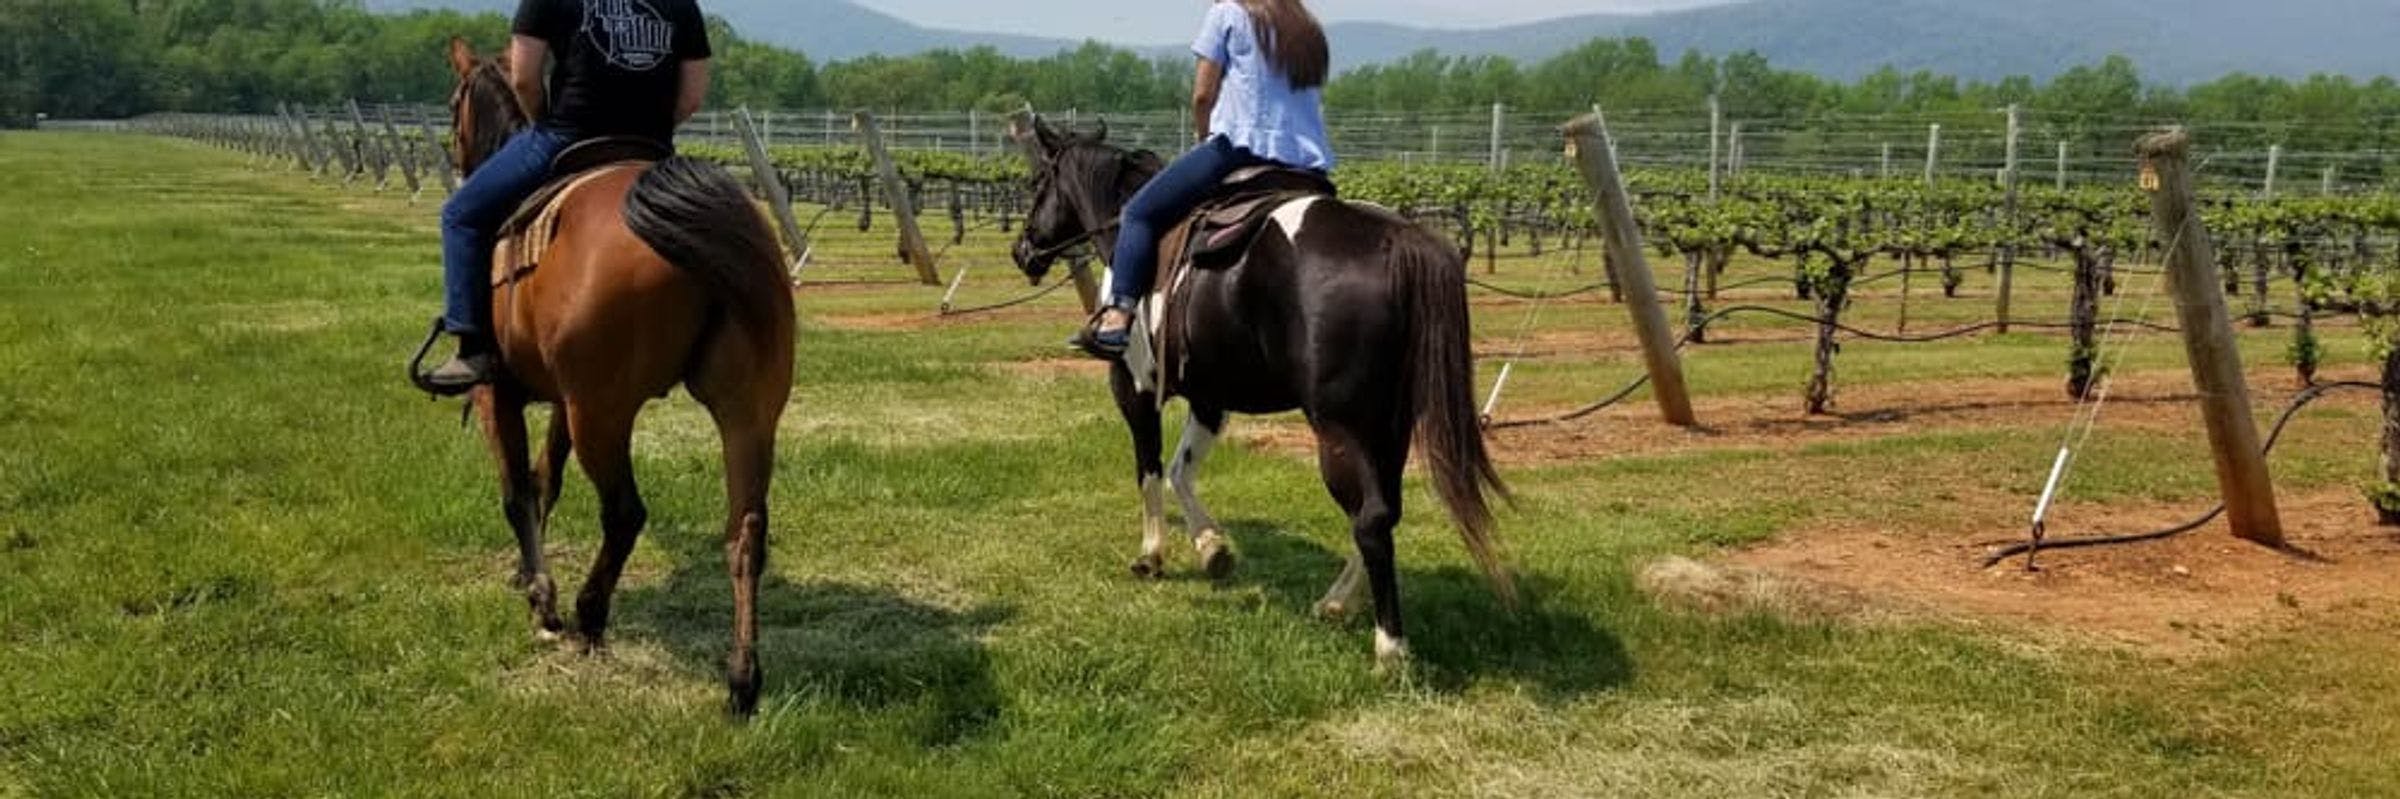 HORSEBACK RIDING IN WINE COUNTRY